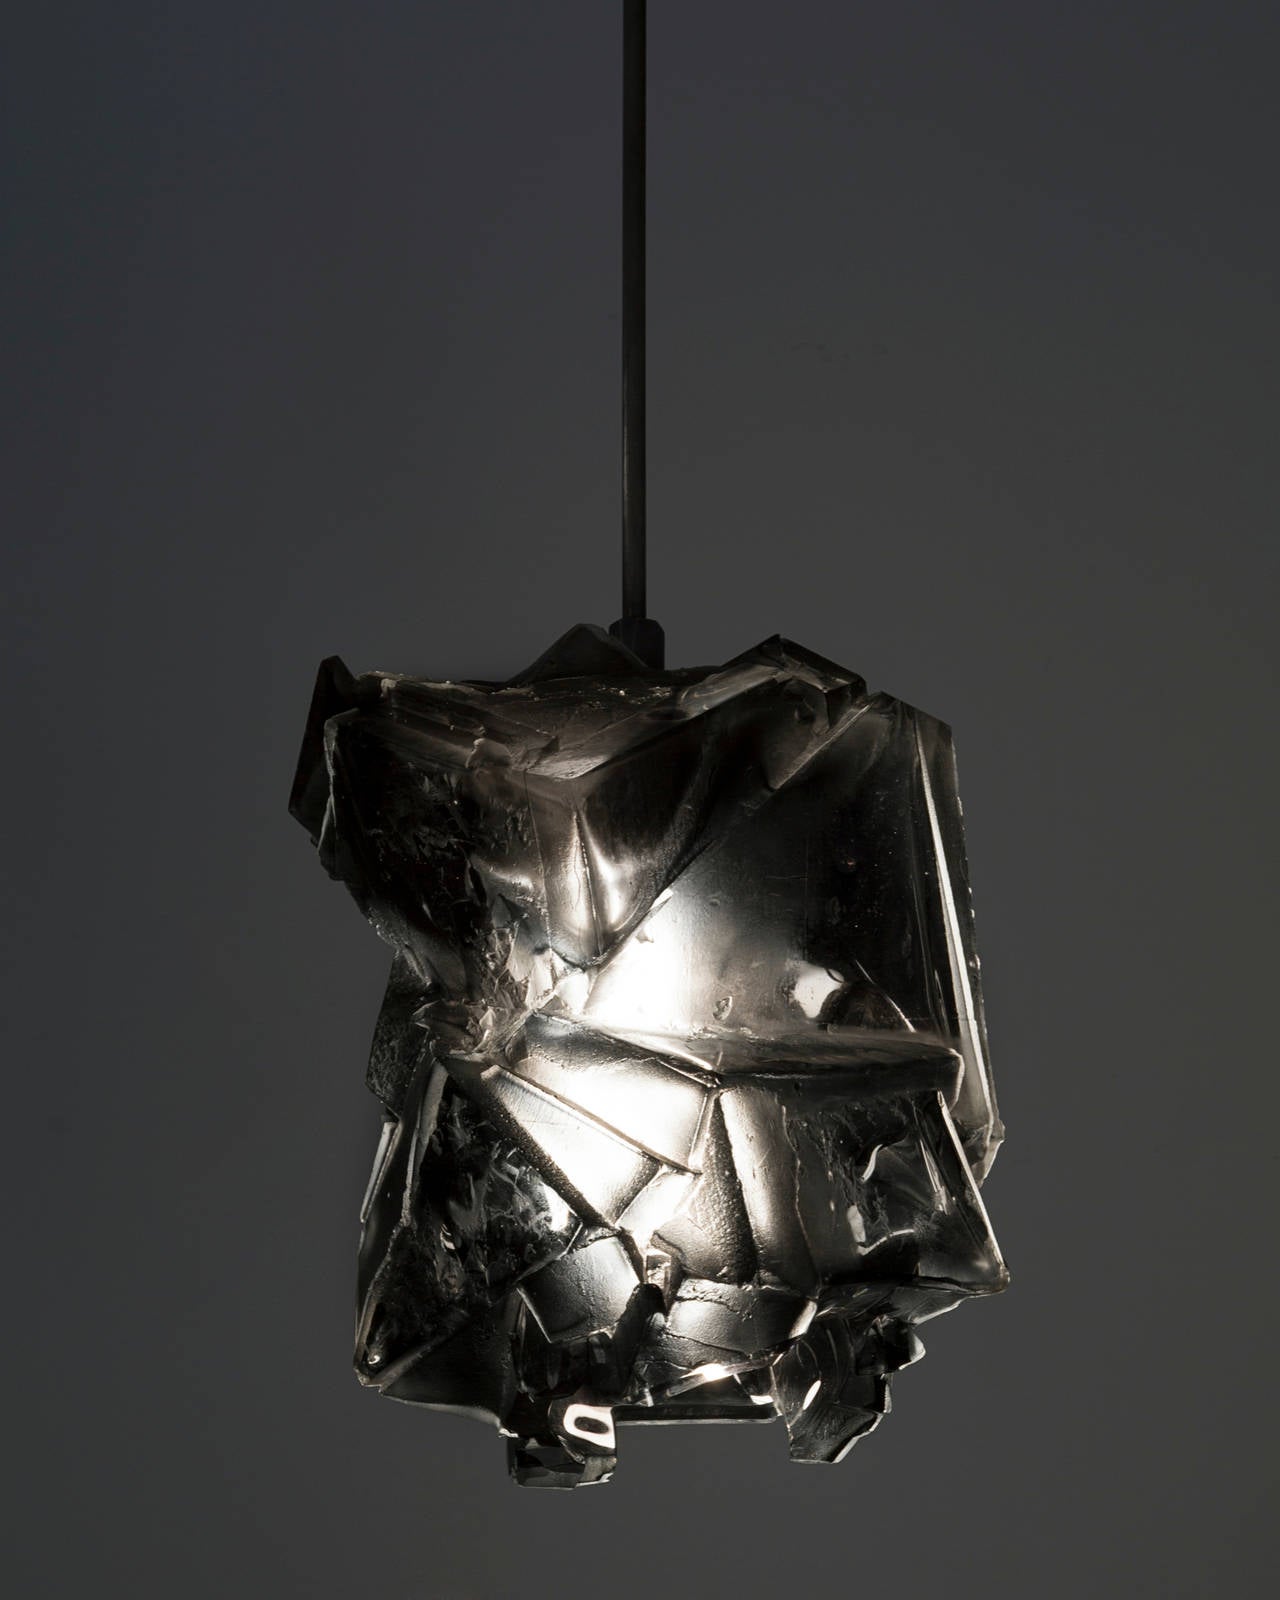 HL1358.
Unique assemblage pendant lamp in grey handblown, cut and polished glass. Designed and made by Thaddeus Wolfe, USA, 2014.
   